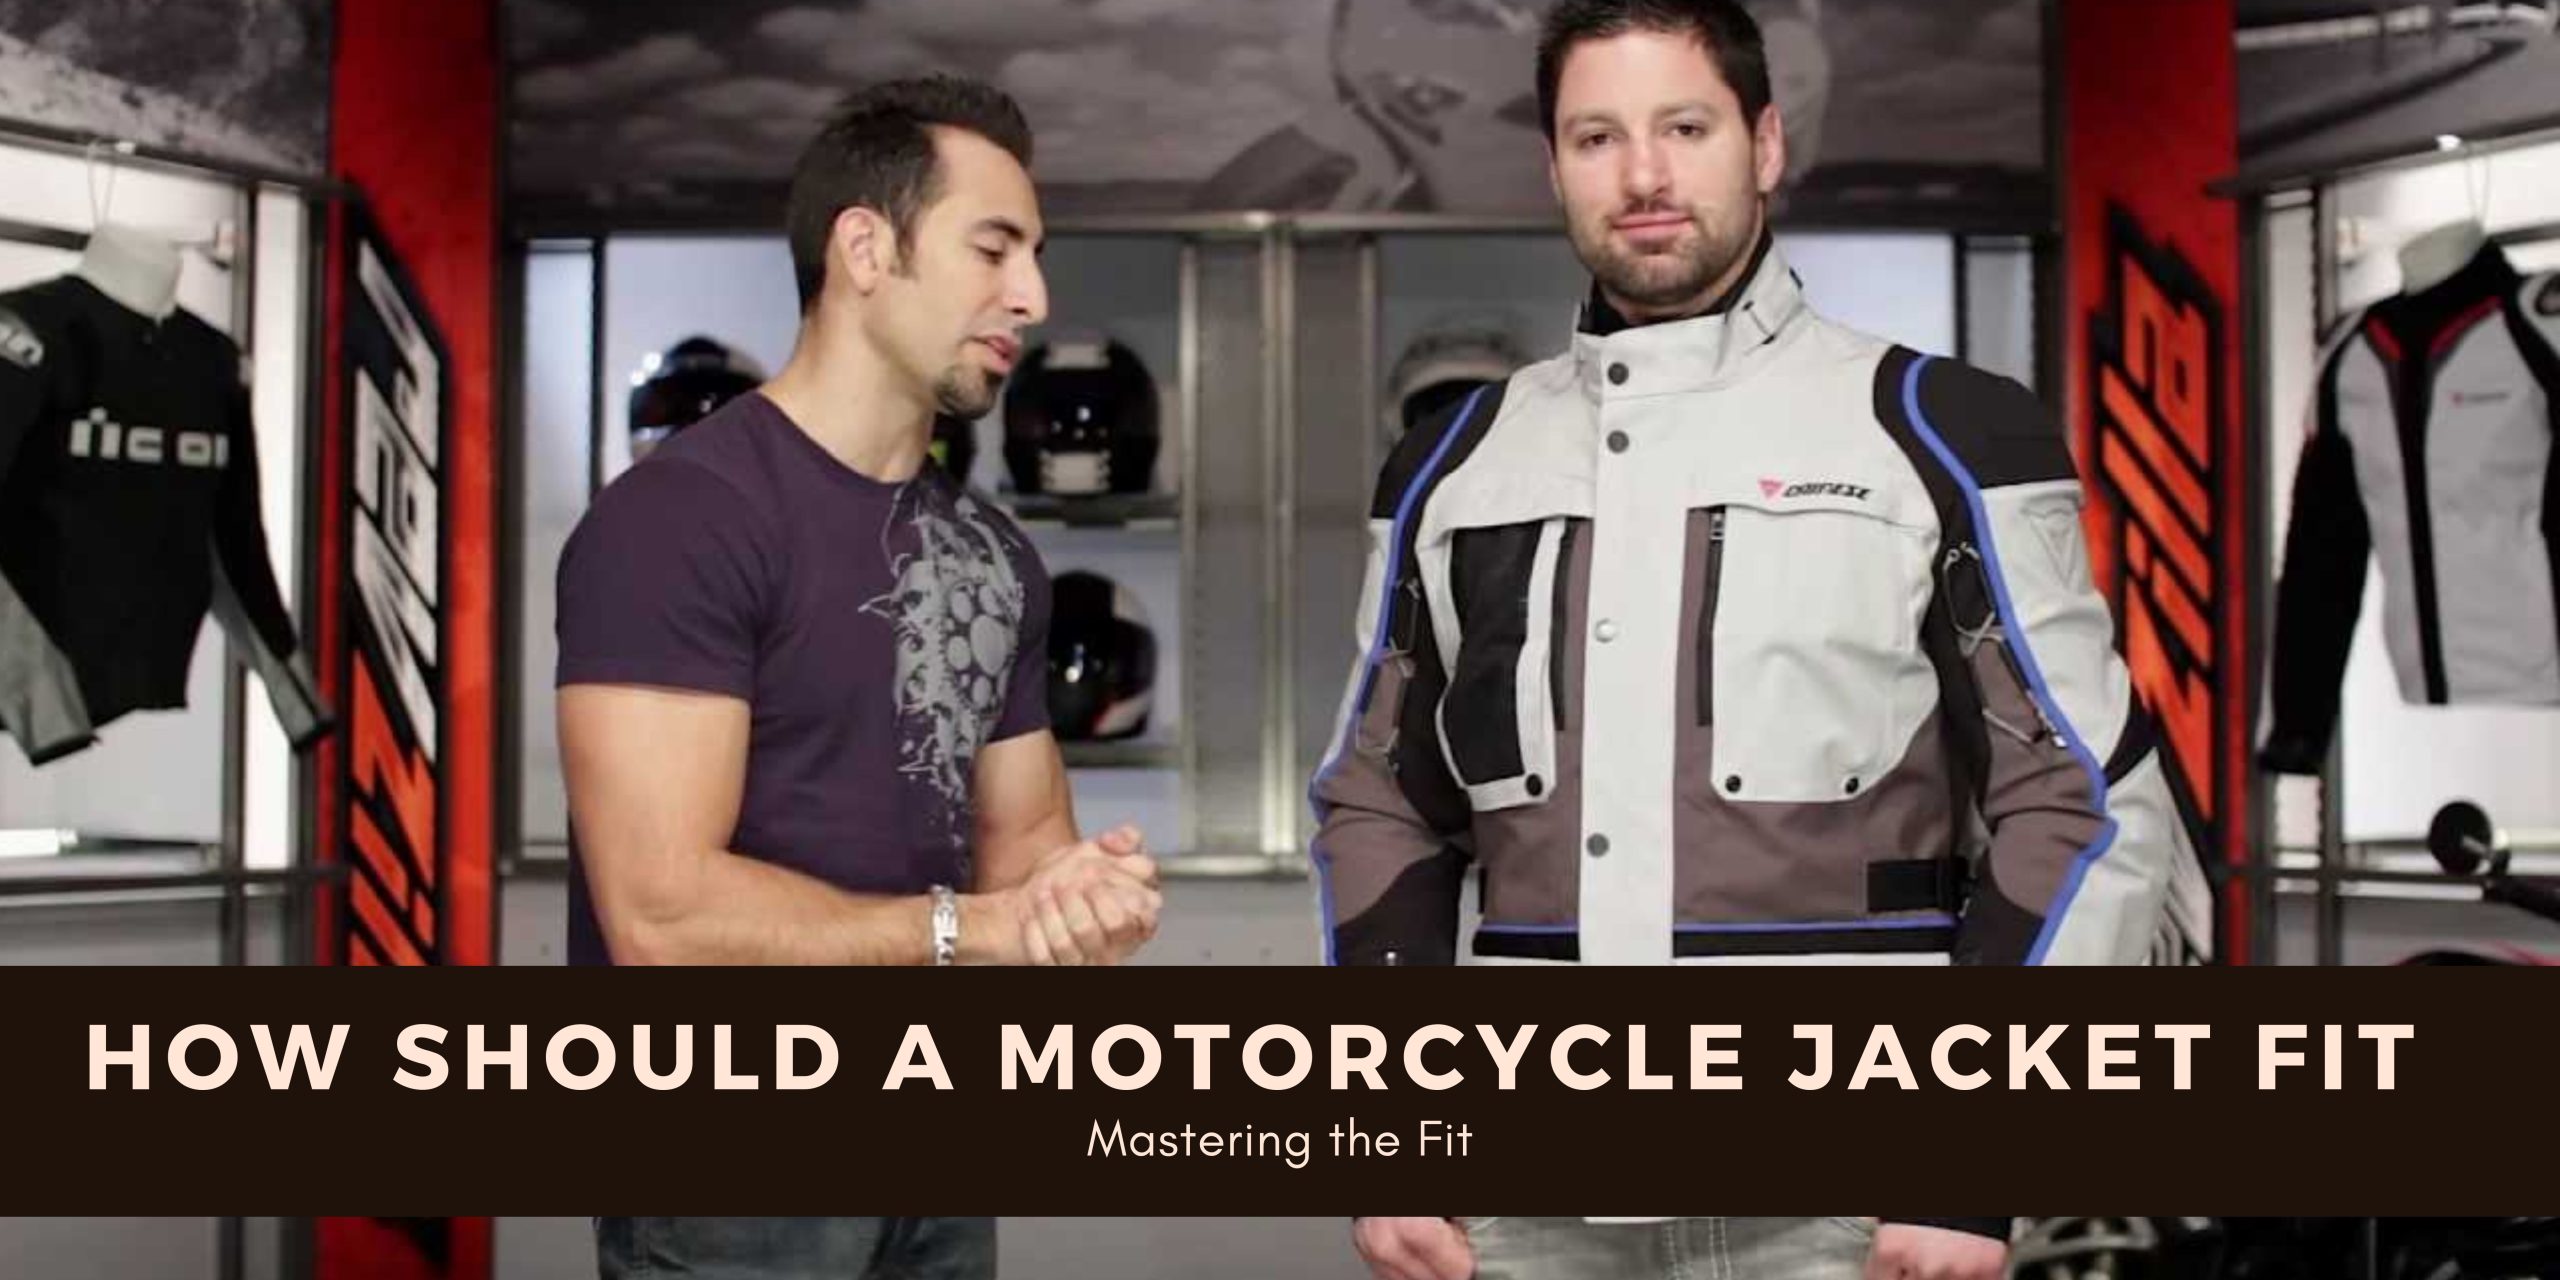 How Should a Motorcycle Jacket Fit